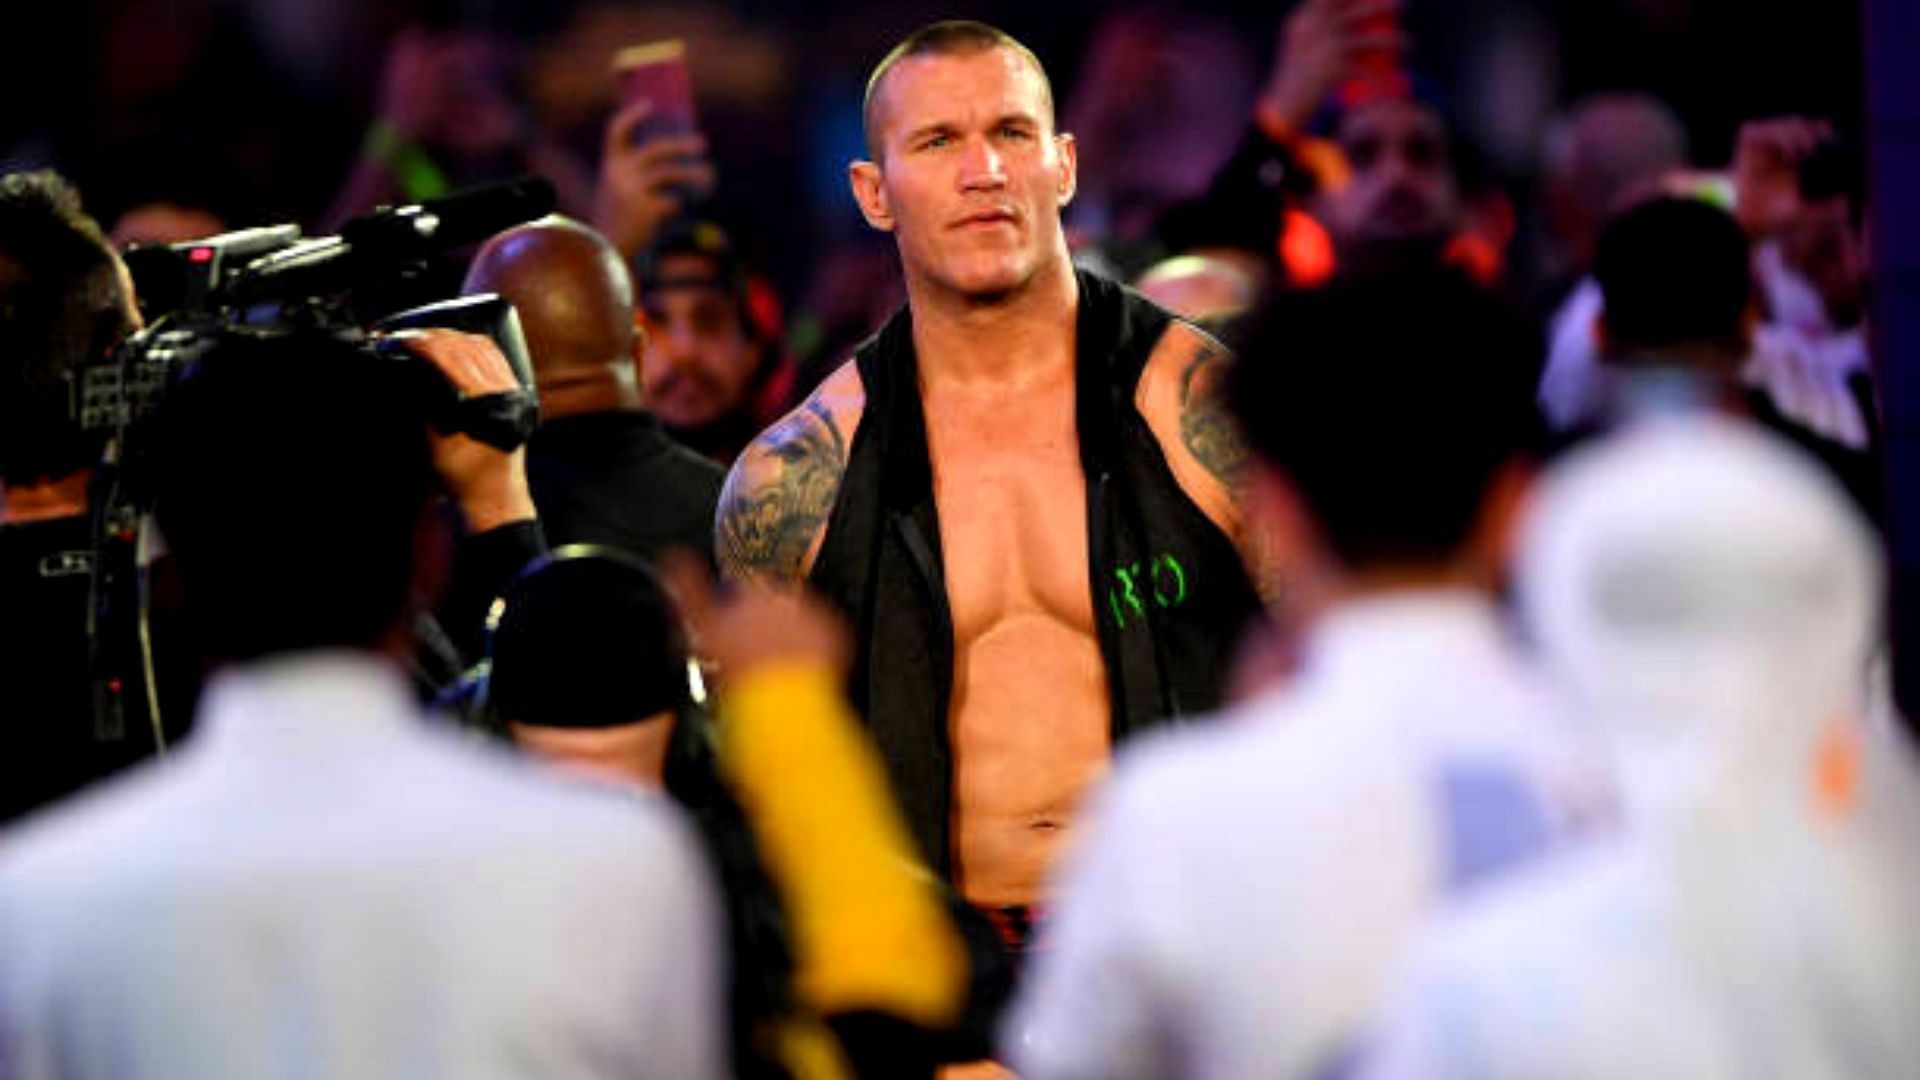 WWE veteran Randy Orton has been out of action since May 2022